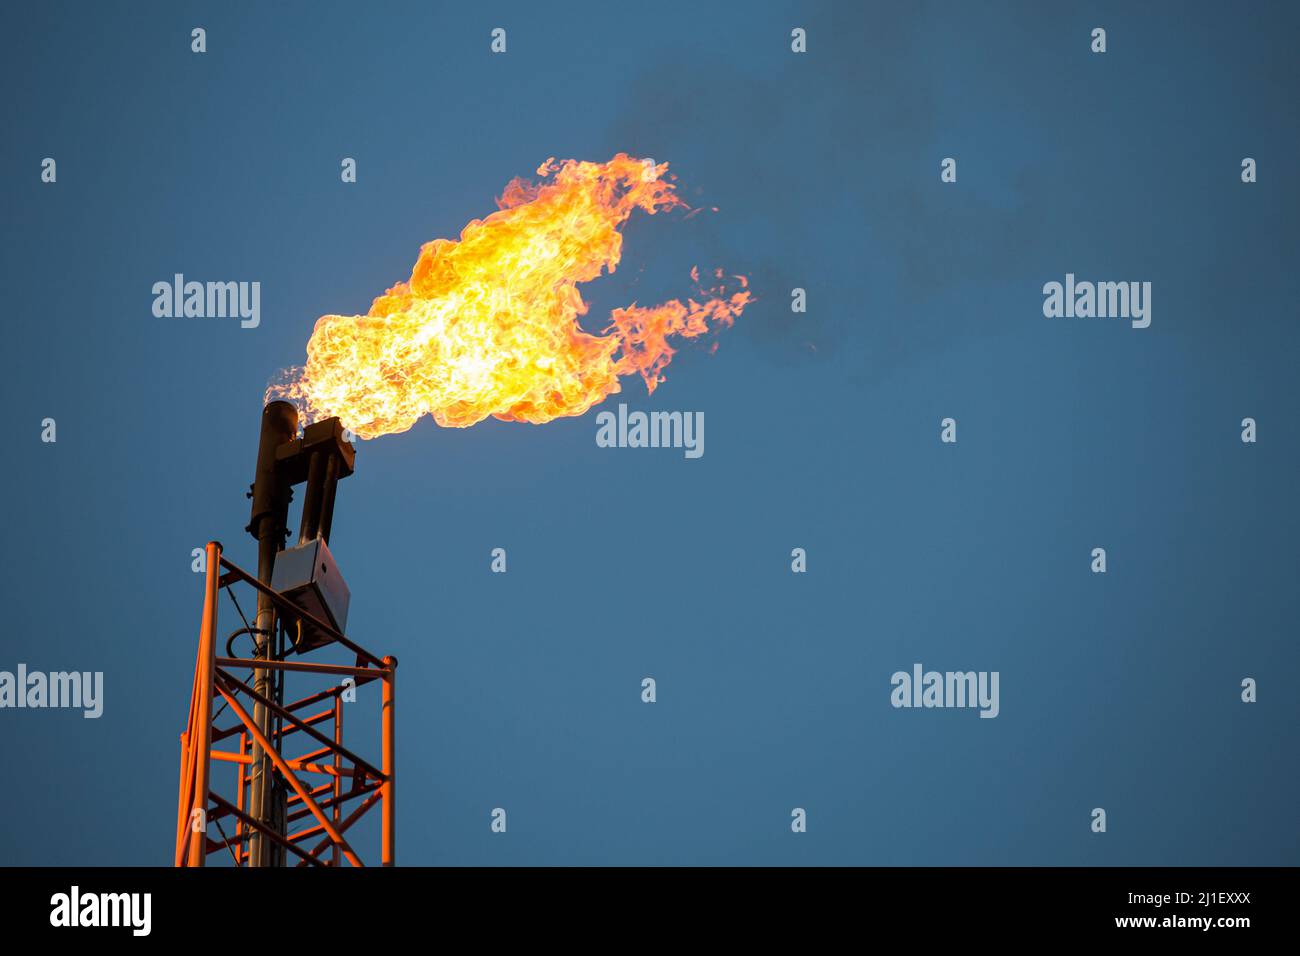 A burning flare seen at an oil extraction area located in Lakie, Lubusz Voivodeship. The characteristic flaming flare is formed by the combustion of natural gas, which is extracted along with crude oil. It is used when the operator does not have a gas transmission installation or the further management of the extracted raw material is economically unprofitable. PGNiG (Polish Oil Mining and Gas Extraction S.A.) plans to spend PLN 10.8 billion on investments in 2022, the company announced in its annual report. The estimated oil production in Poland in 2022 is 0.677 million tones. (Photo by Karol Stock Photo